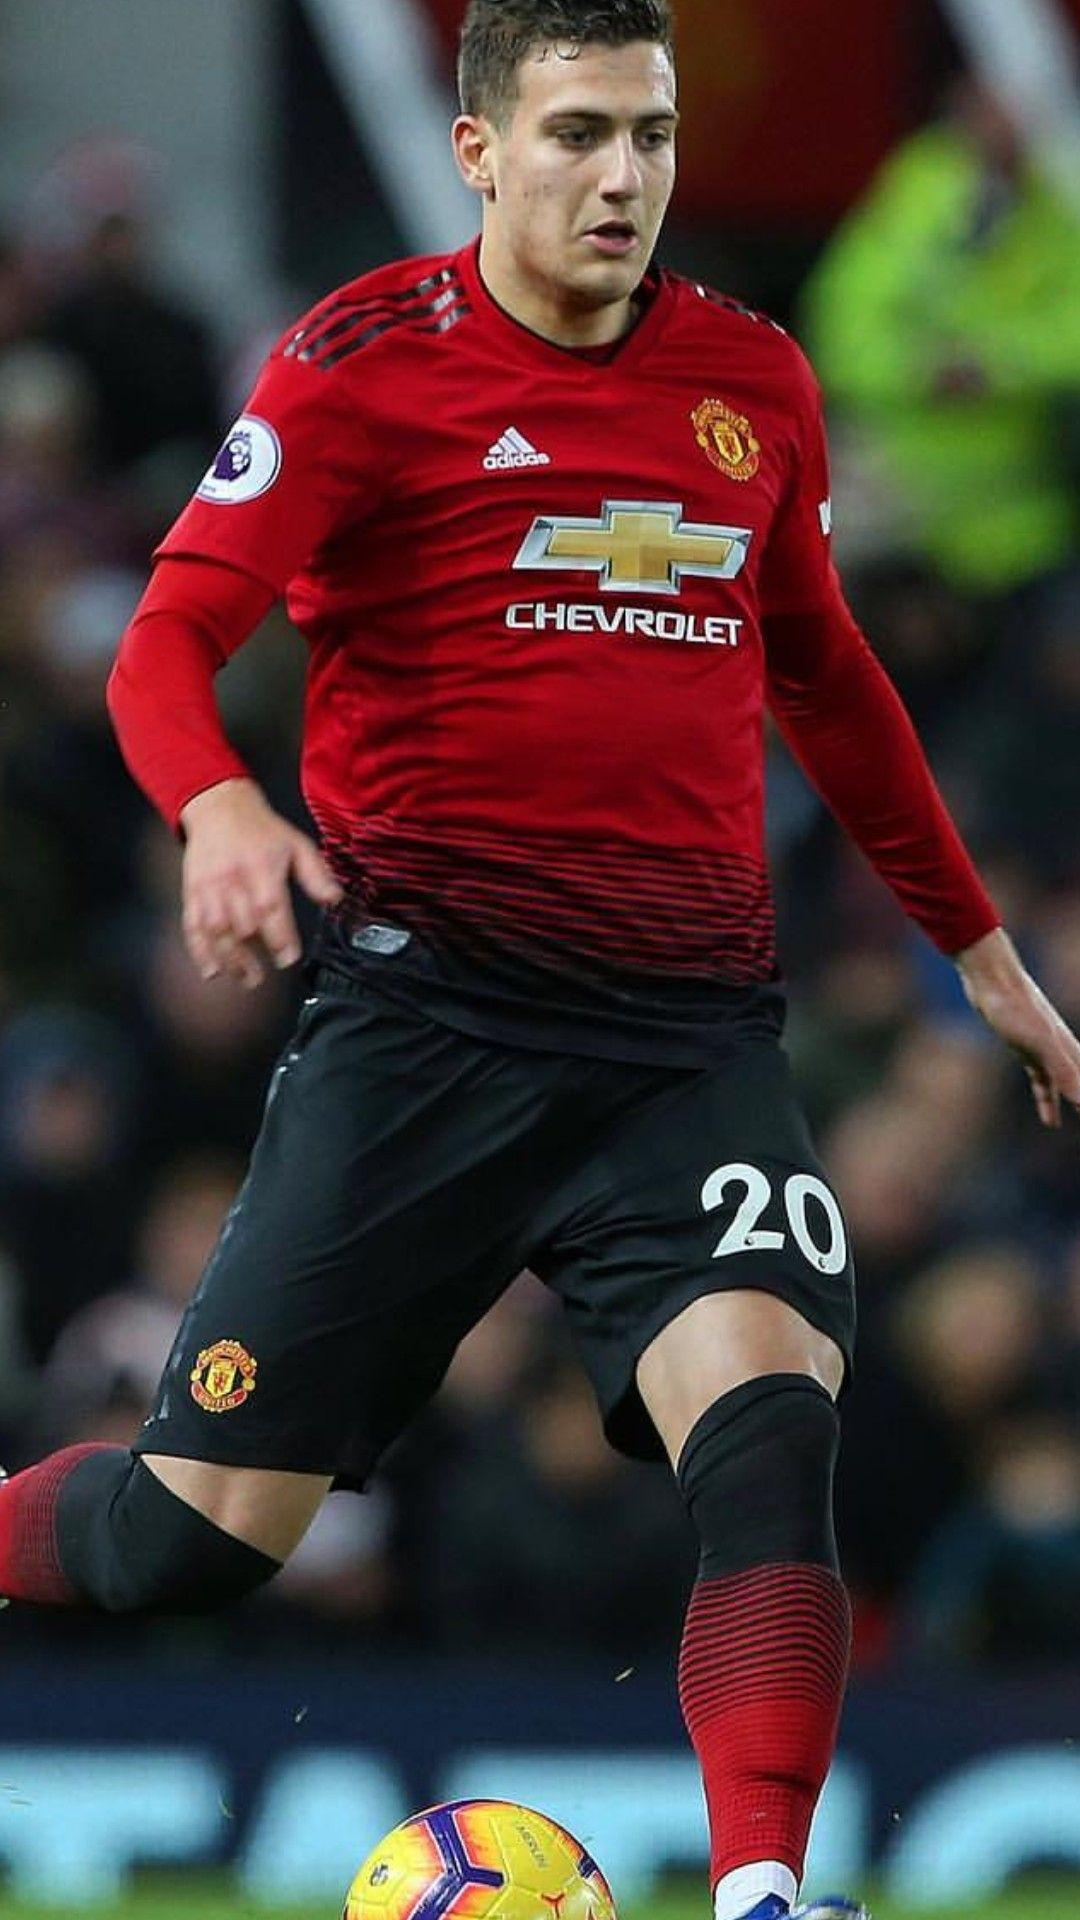 DIOGO DALOT man of the match????????#ManchesterUnited 4:1 #Fulham